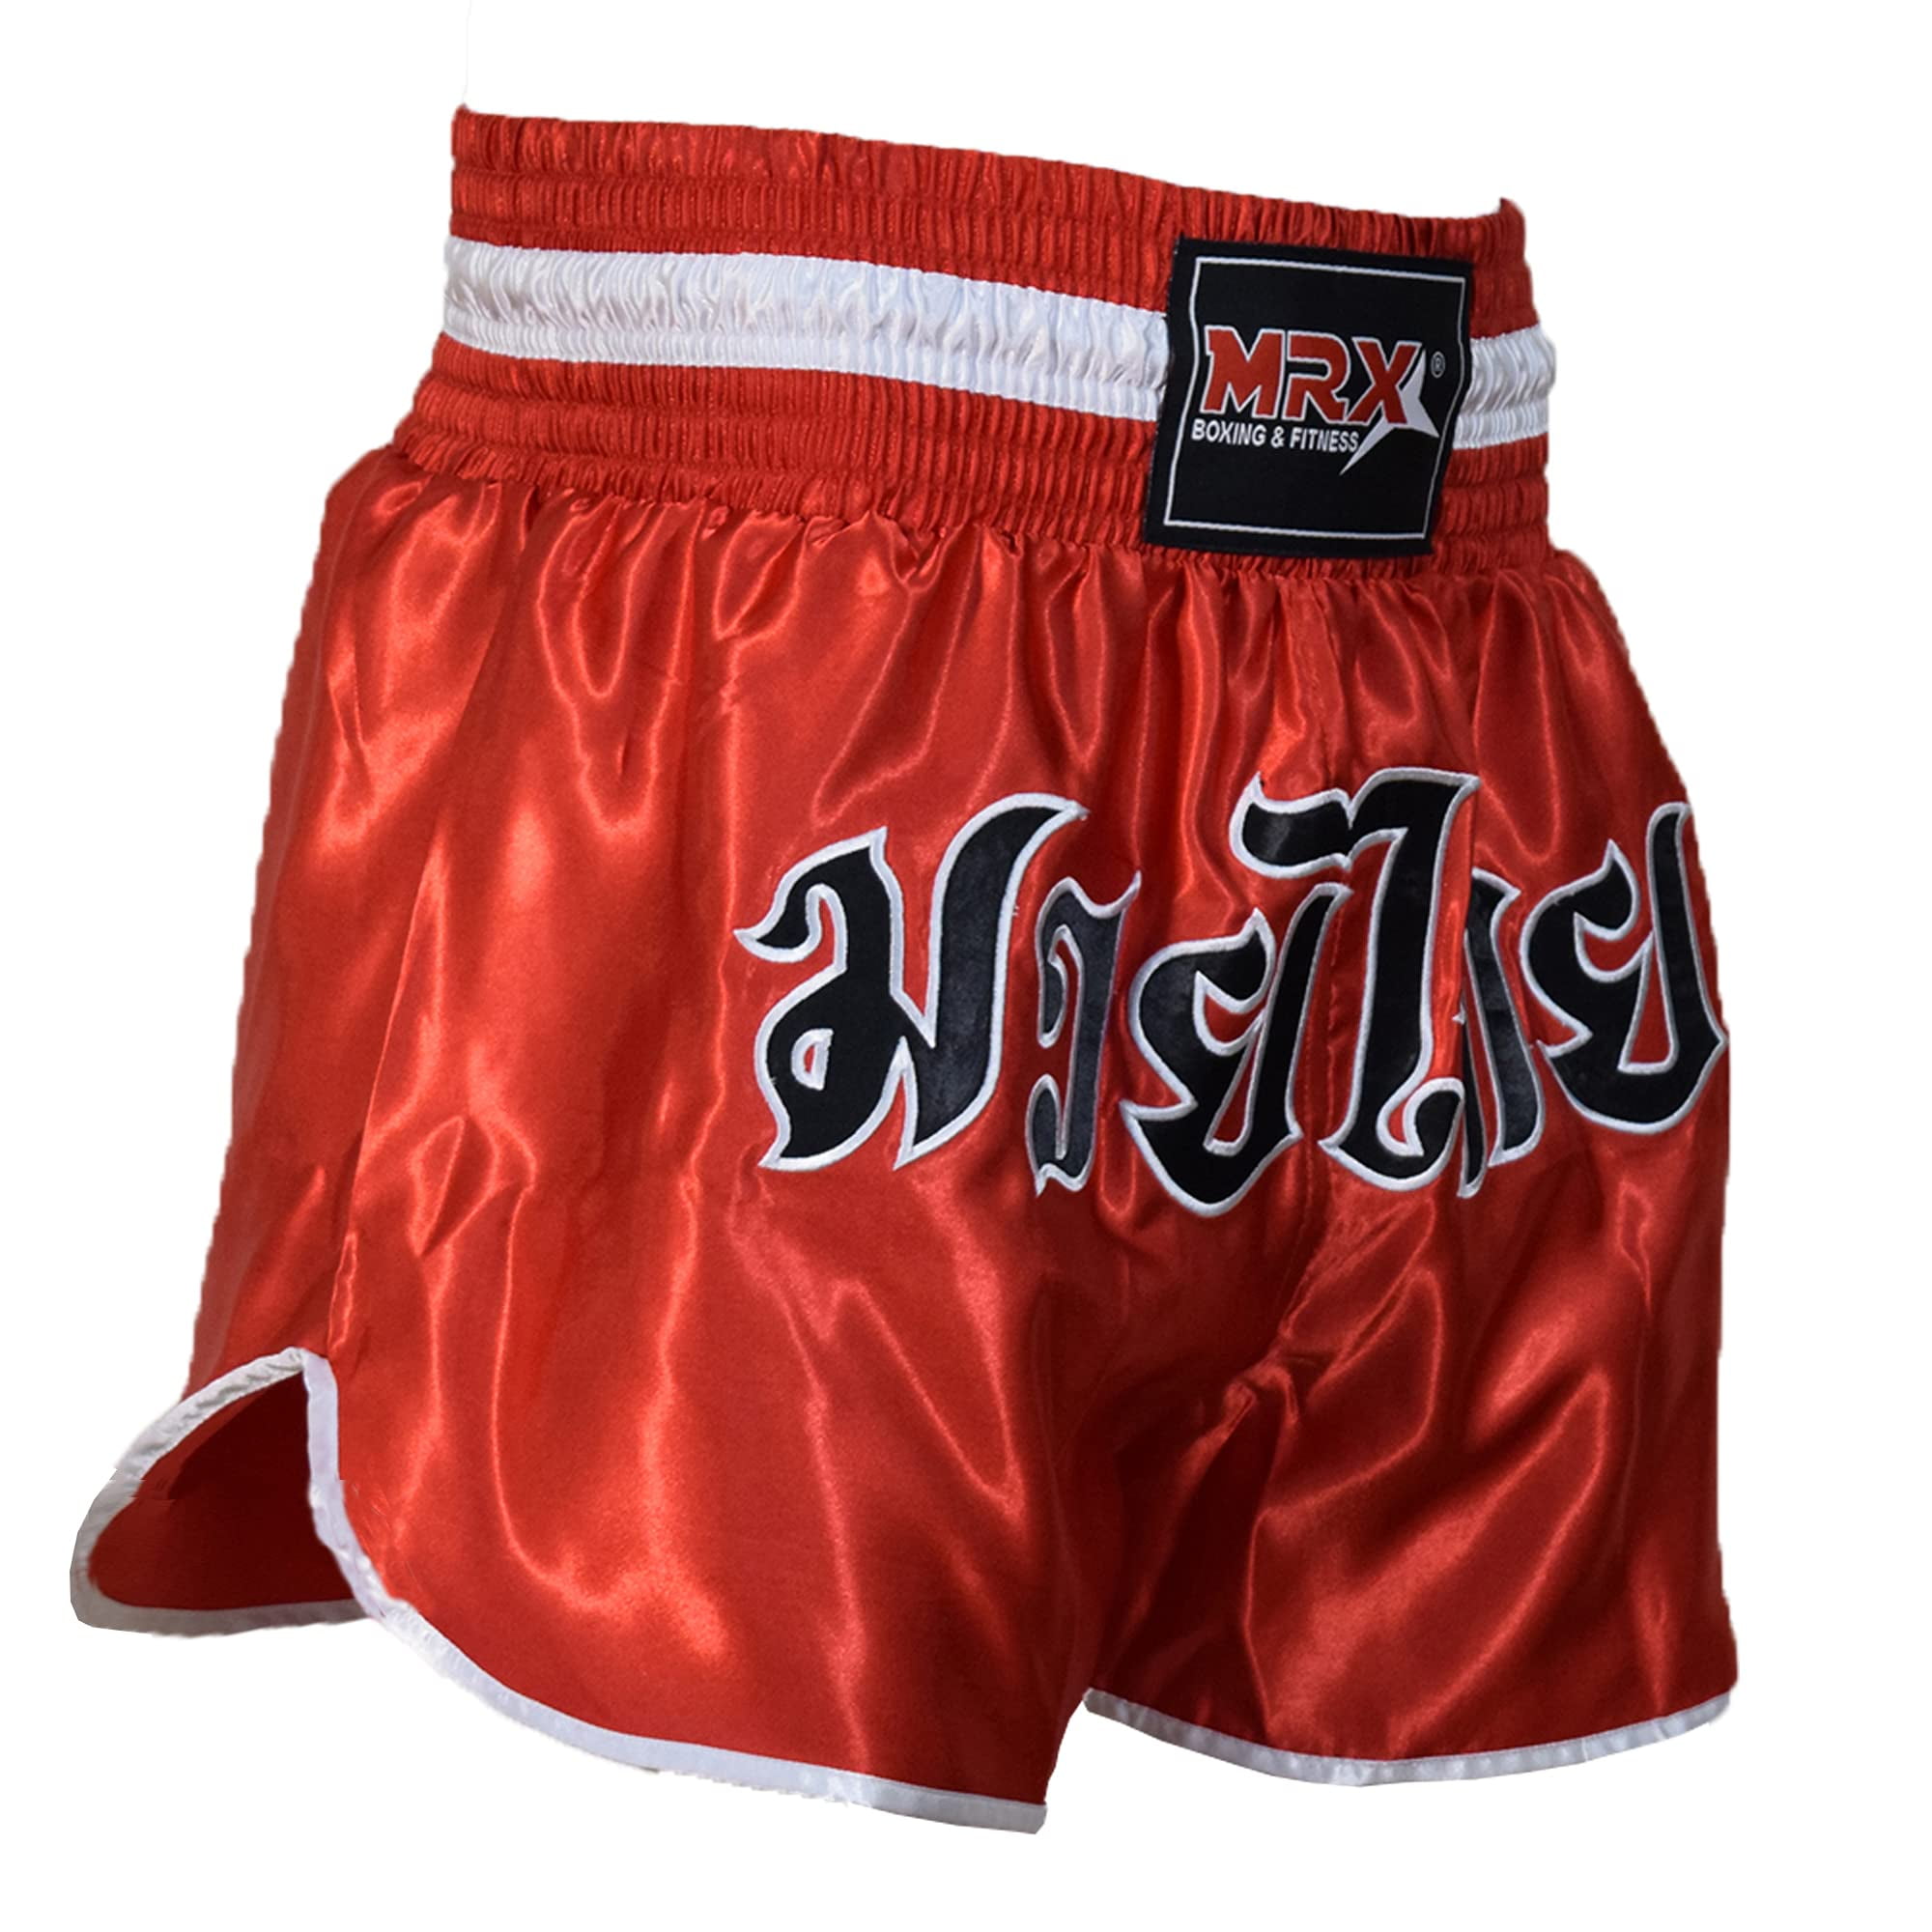 MMA Boxing Shorts Muay Thai Fight Cage Grappling Short Martial Arts Trunks Gear 